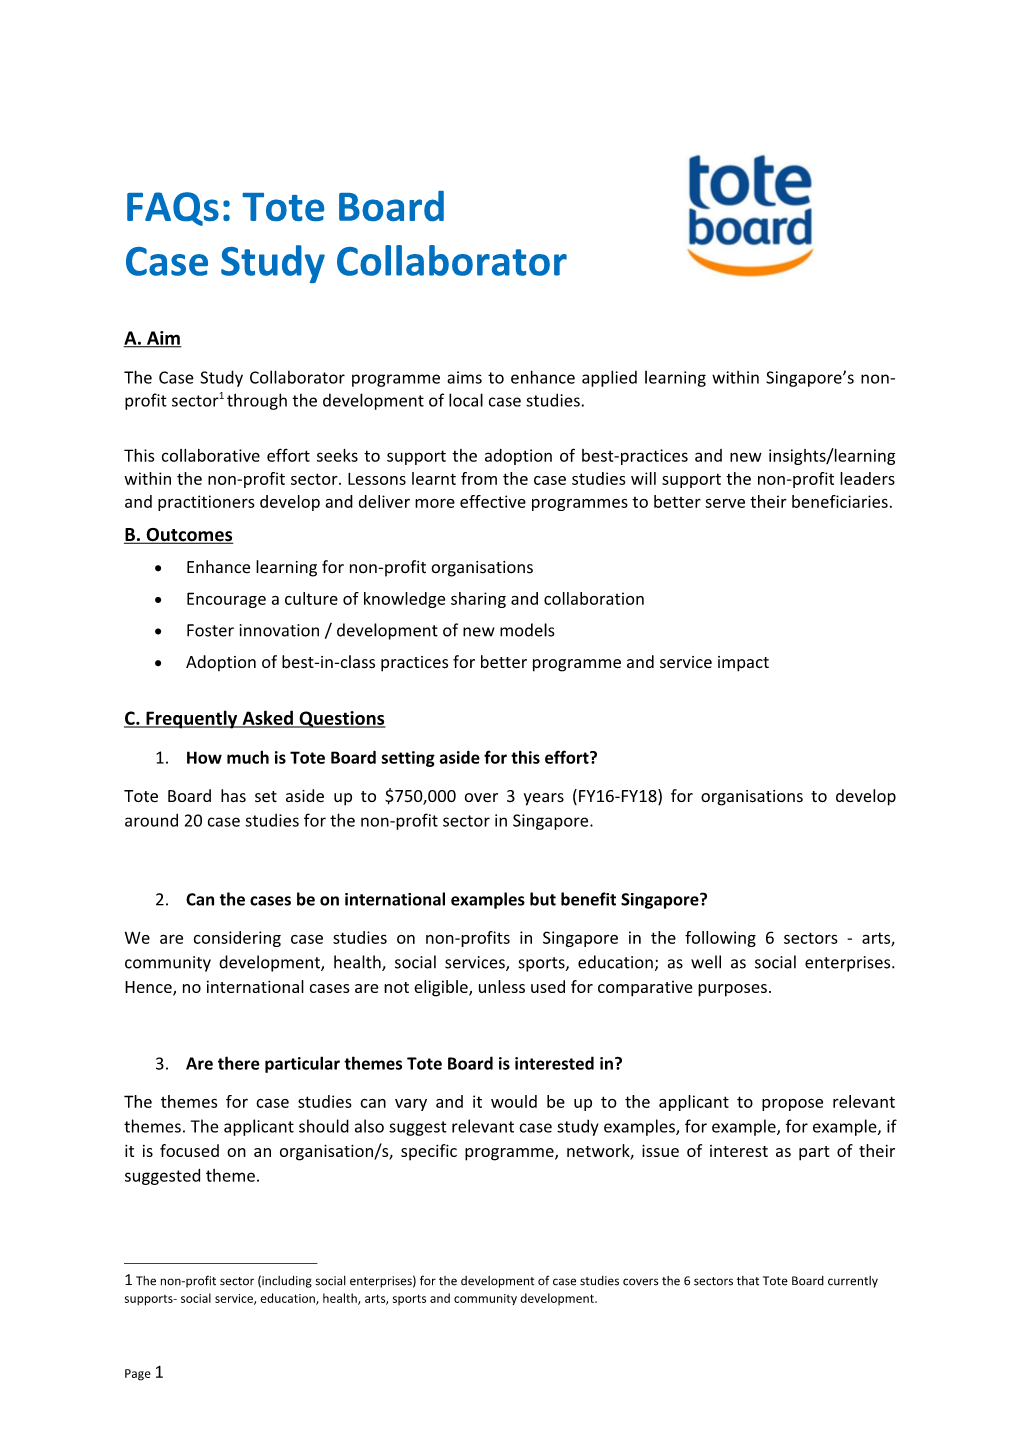 The Case Study Collaboratorprogramme Aims to Enhance Applied Learning Within Singapore